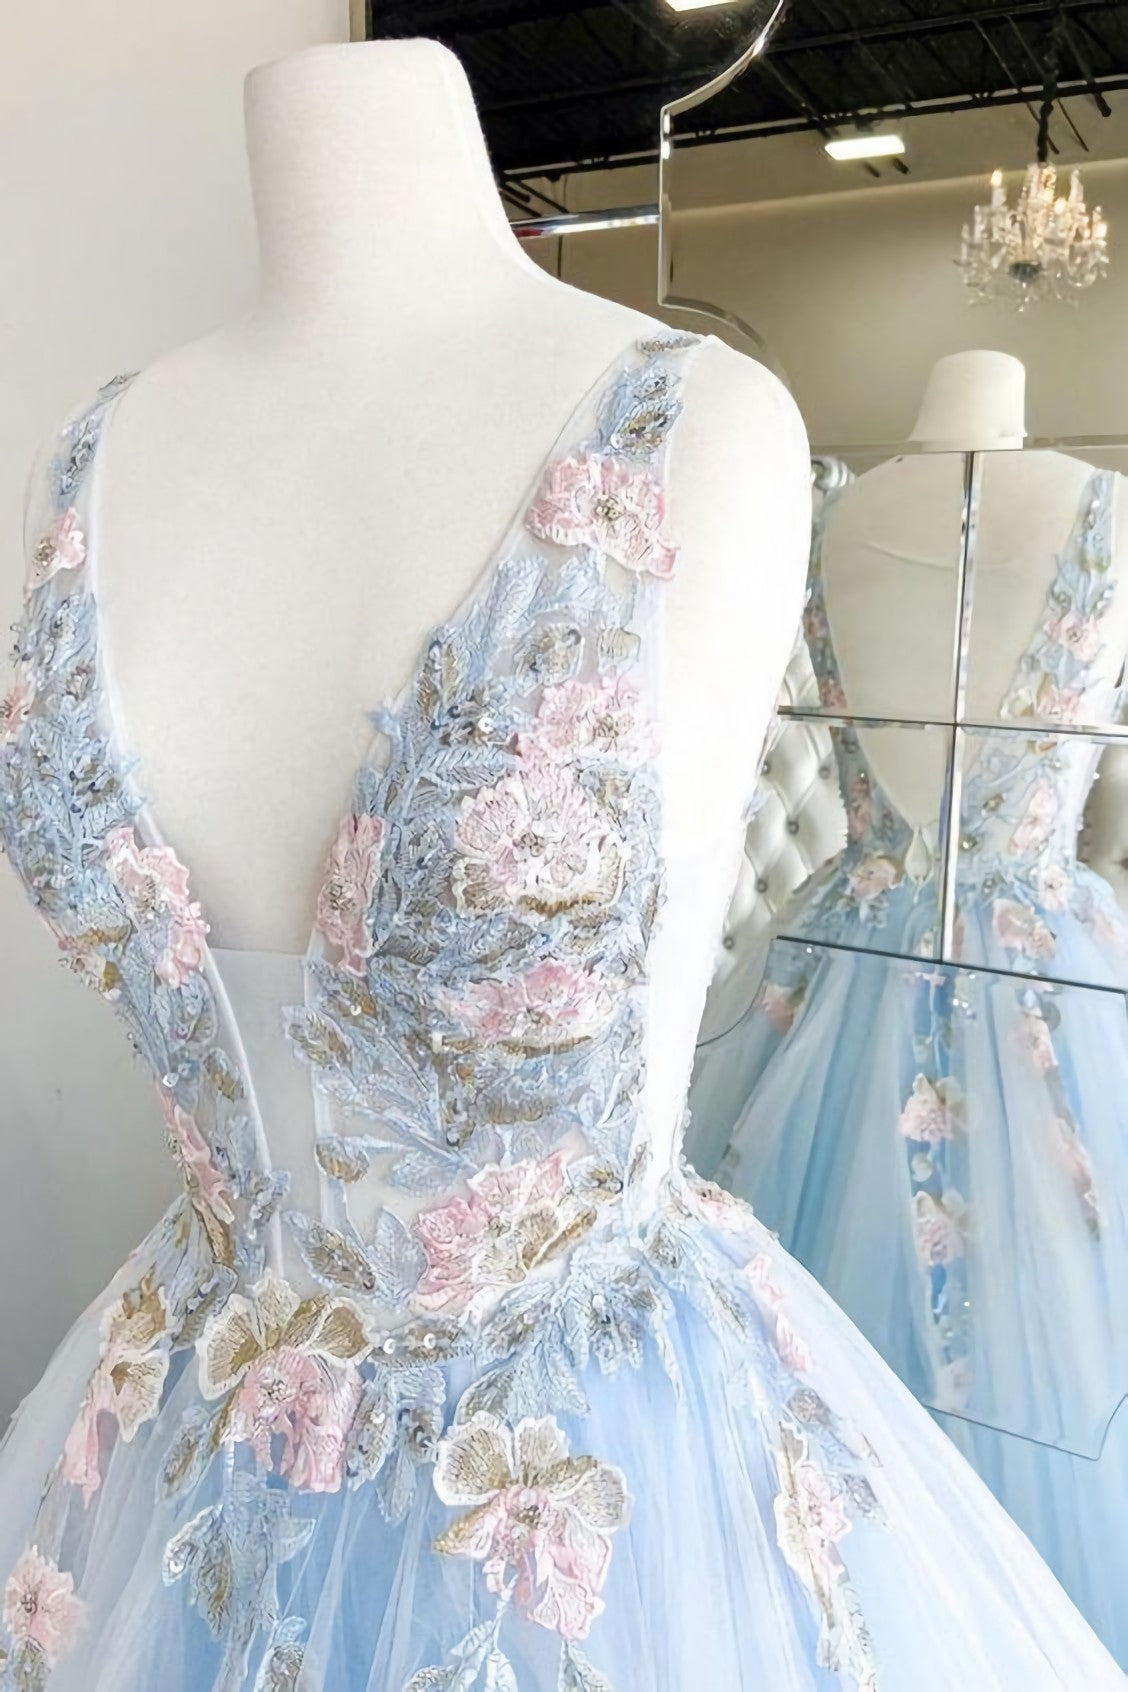 Baby Blue Corset Prom Dress, With Embroidery Gowns, Prom Dress On Sale